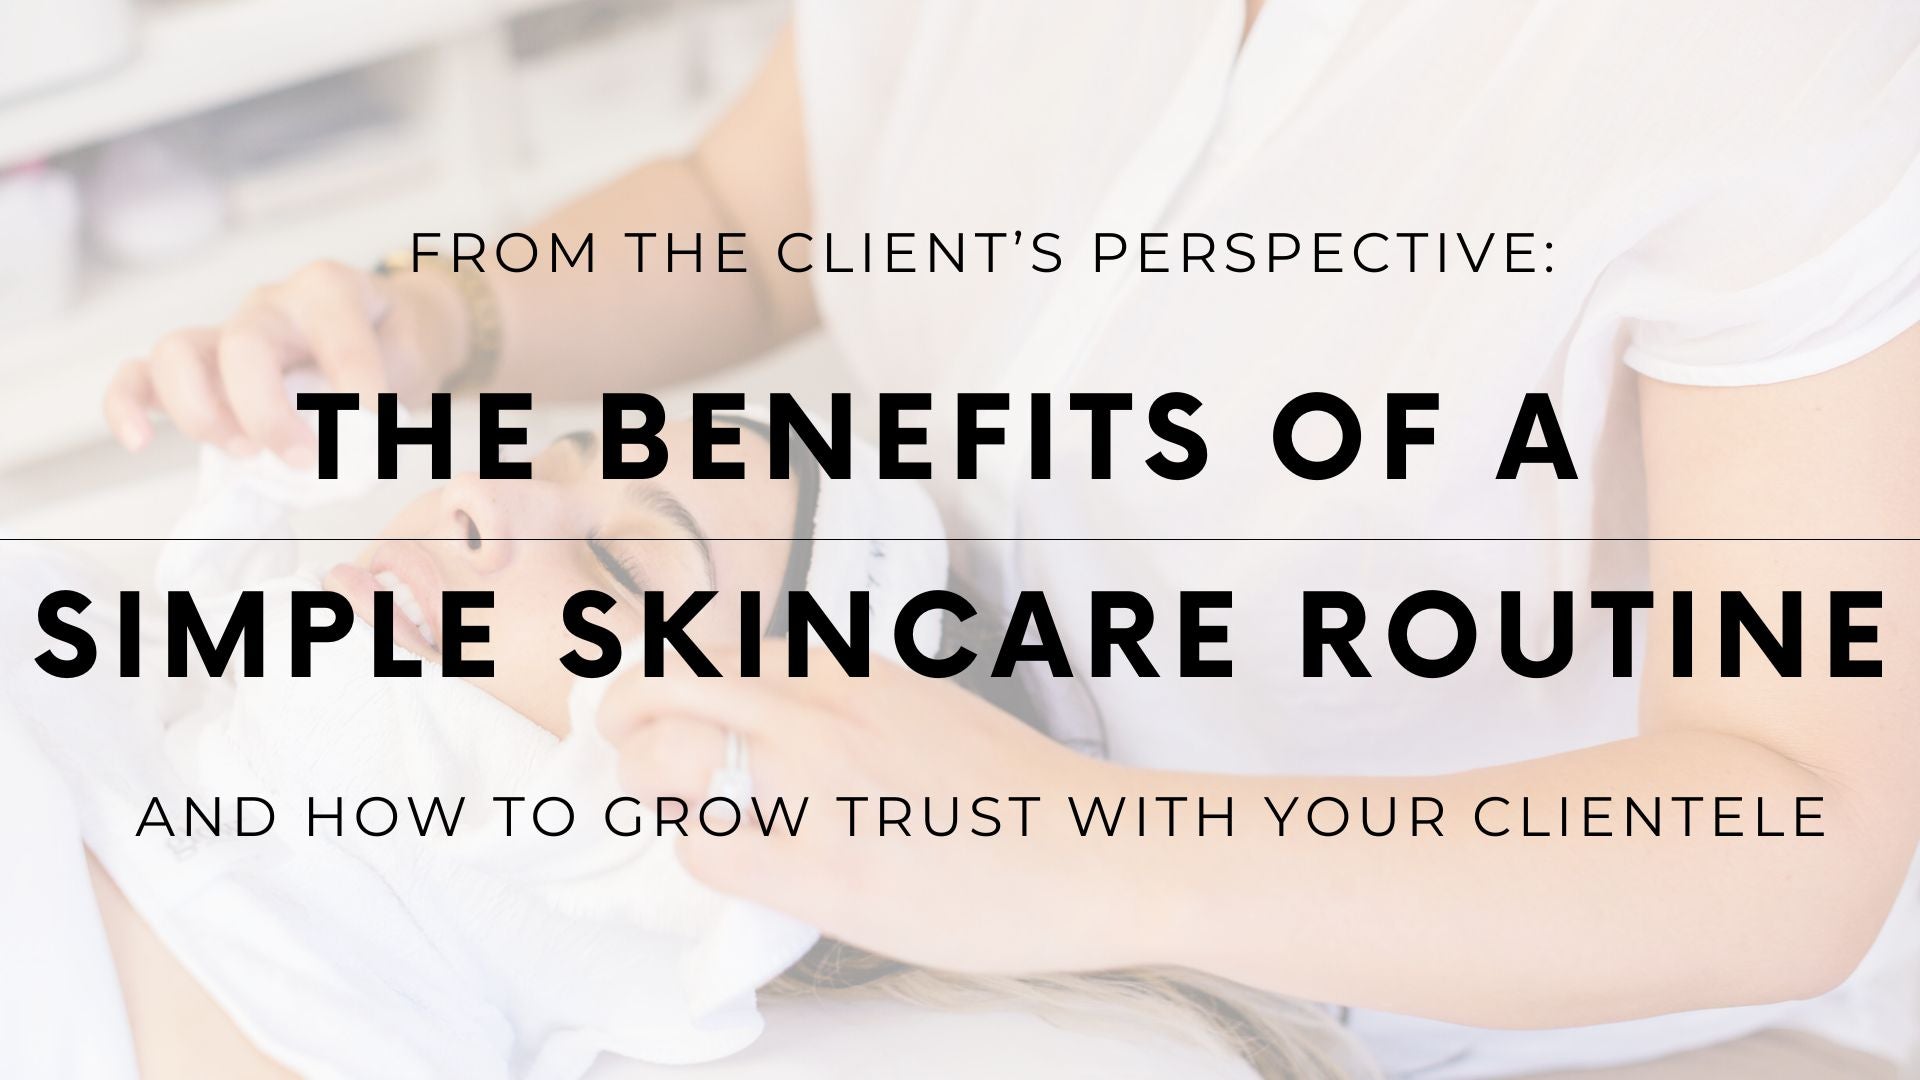 The Benefits of a Simple Skincare Routine and How to Grow Trust with your Clientele